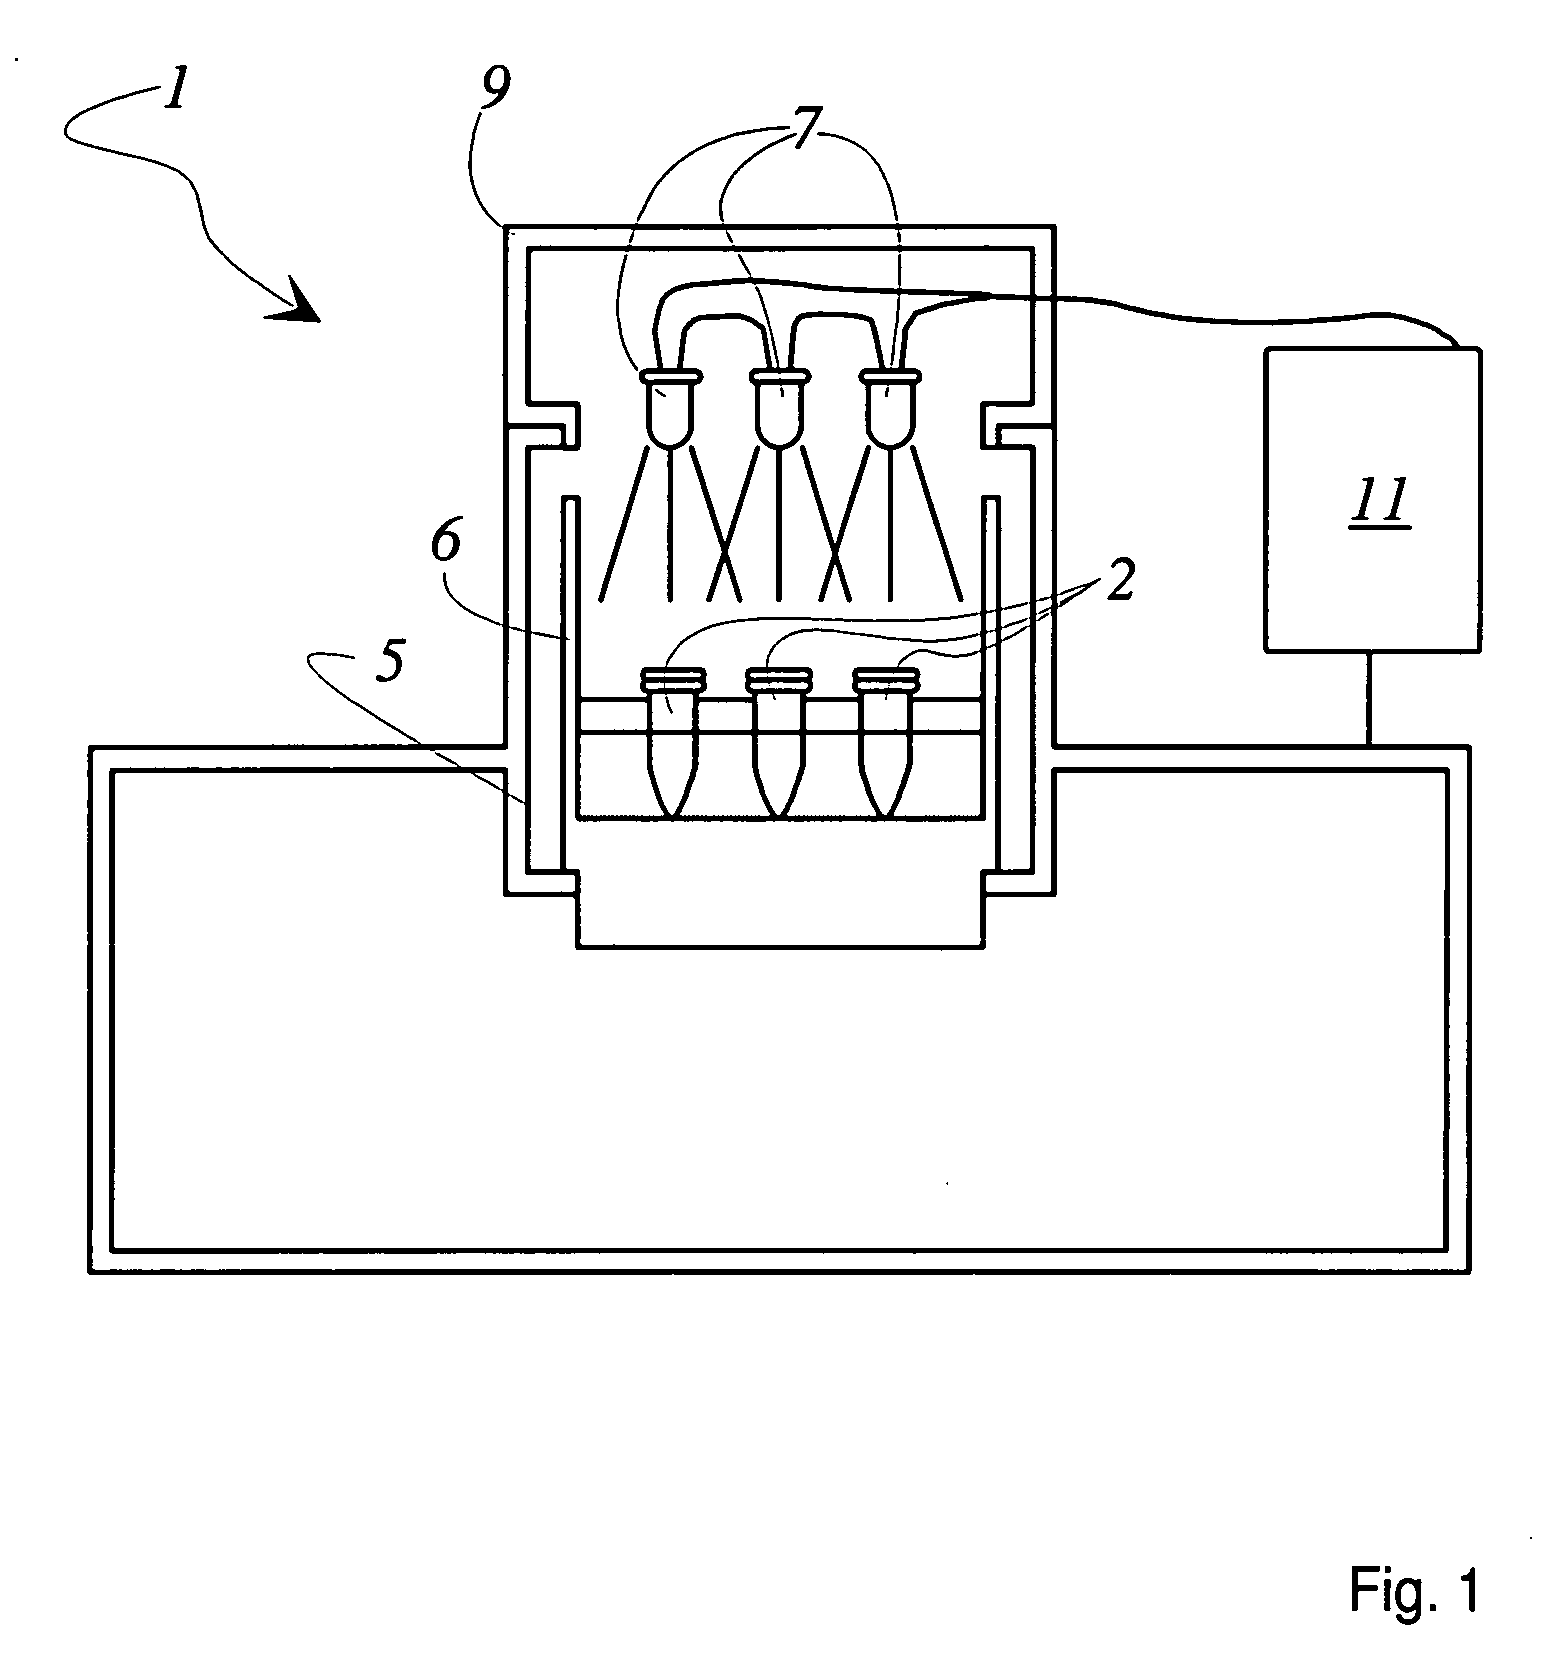 Apparatus for the polymerization of biological specimens in the context of cryosubstitution